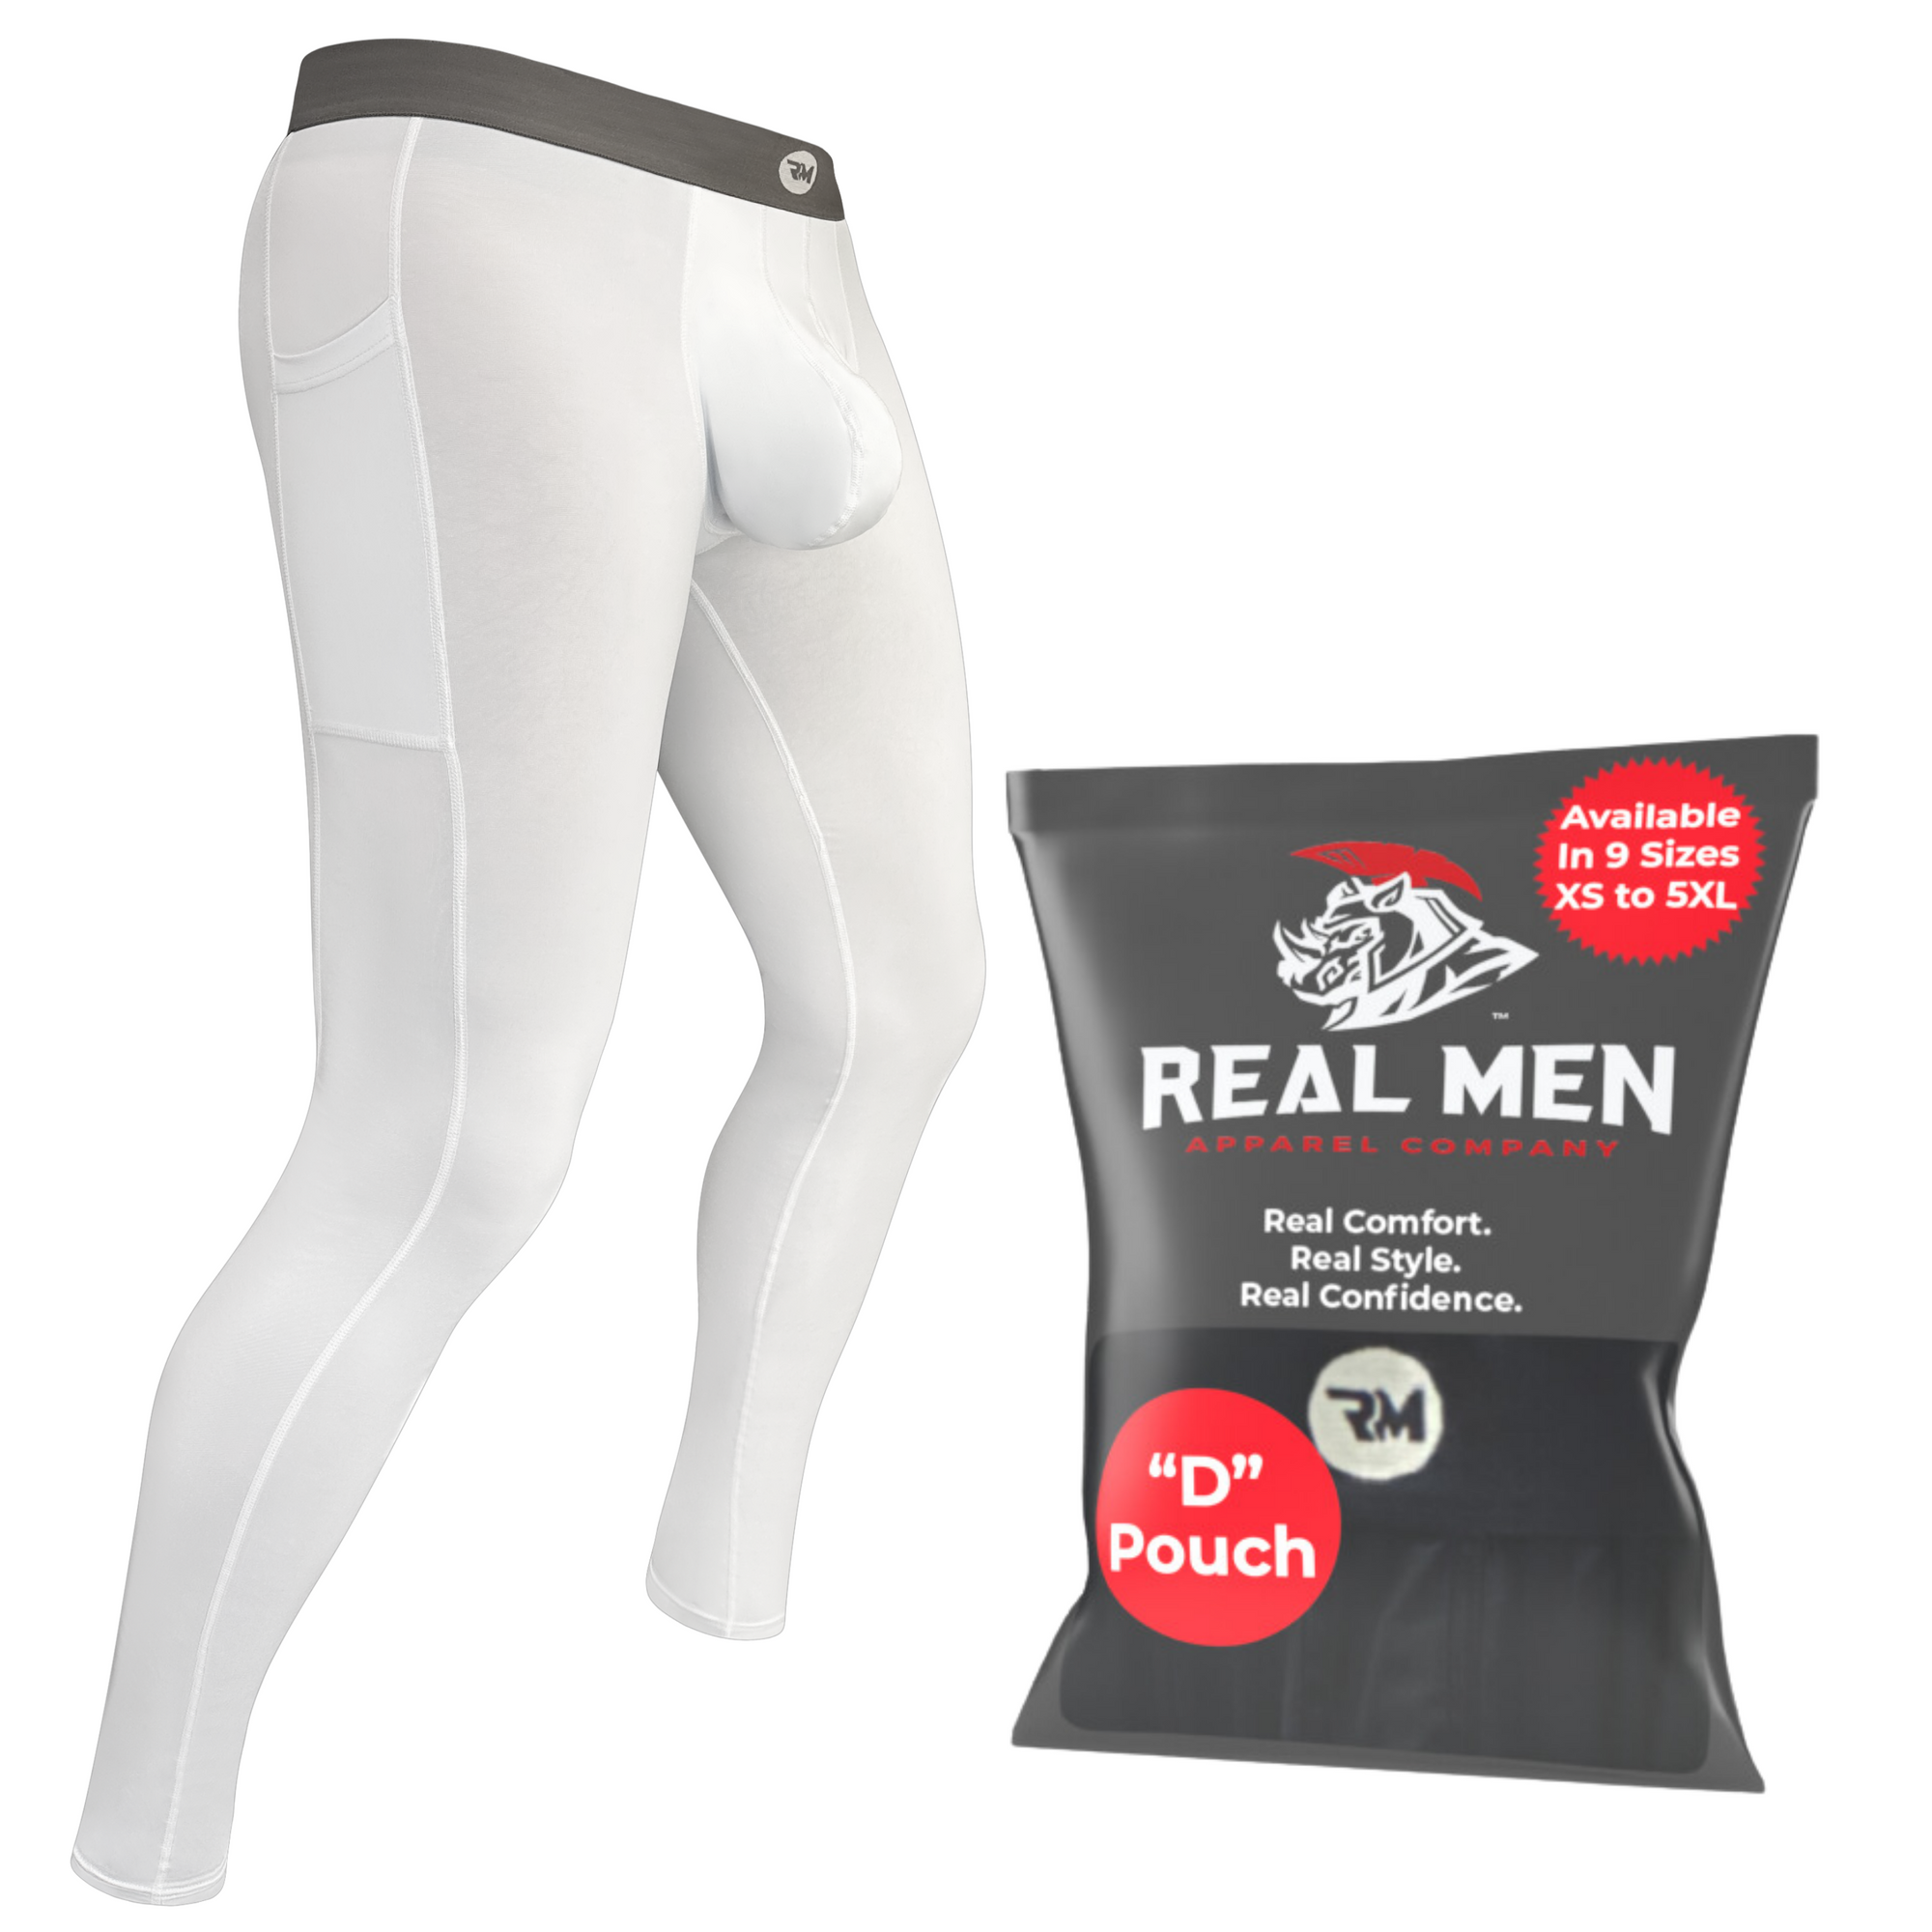 Real Men Athletic Underwear with Support Pouch - 1 or 4 Pack 9in Nylon  Briefs - Size B or D Pouch - XS-5XL